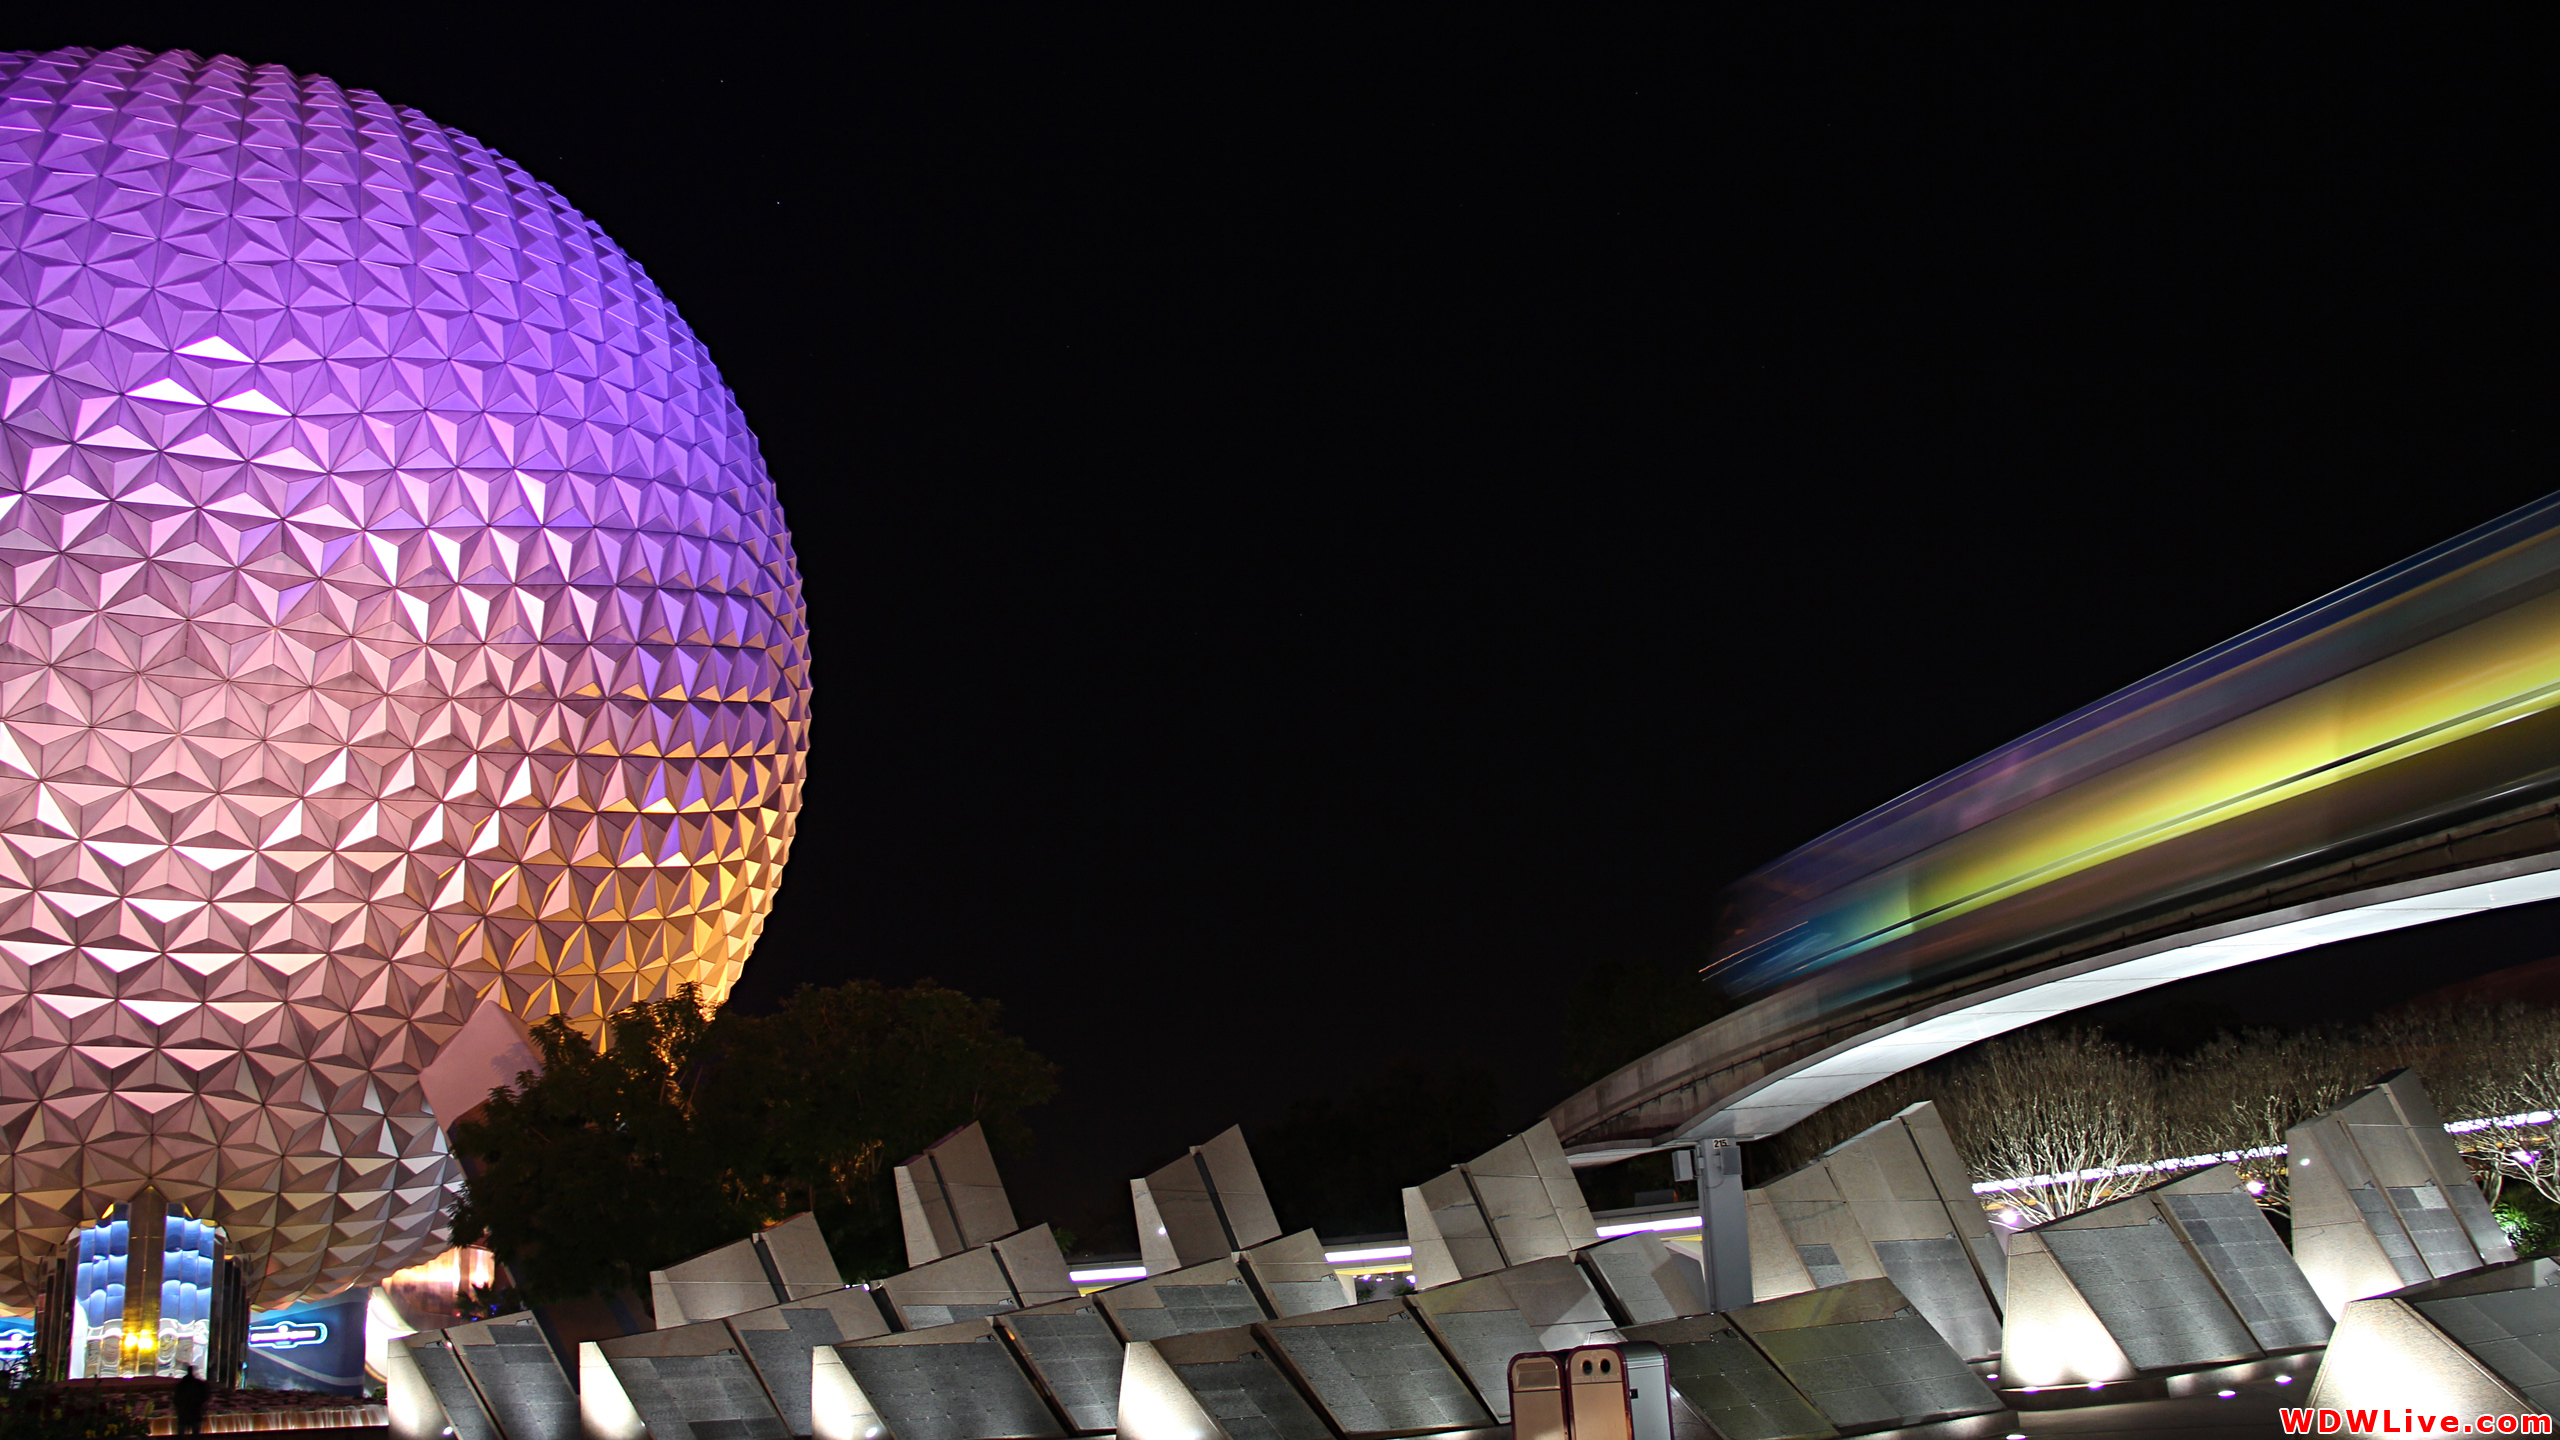 Spaceship Earth Nighttime Of The Tron Monorail Passing Through